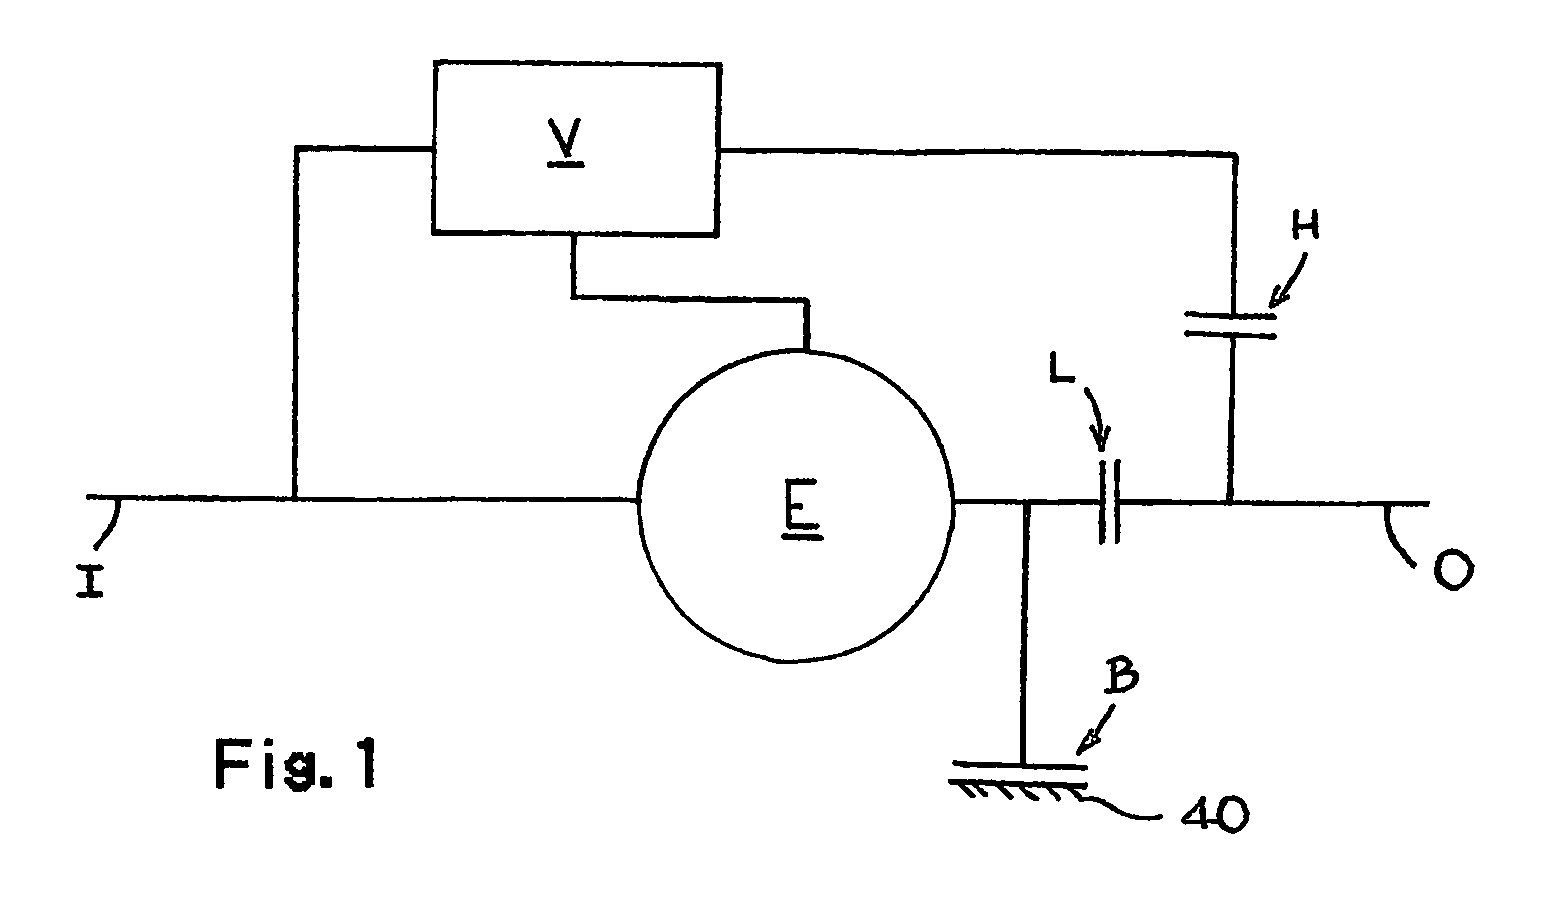 Continuously variable ratio transmission system